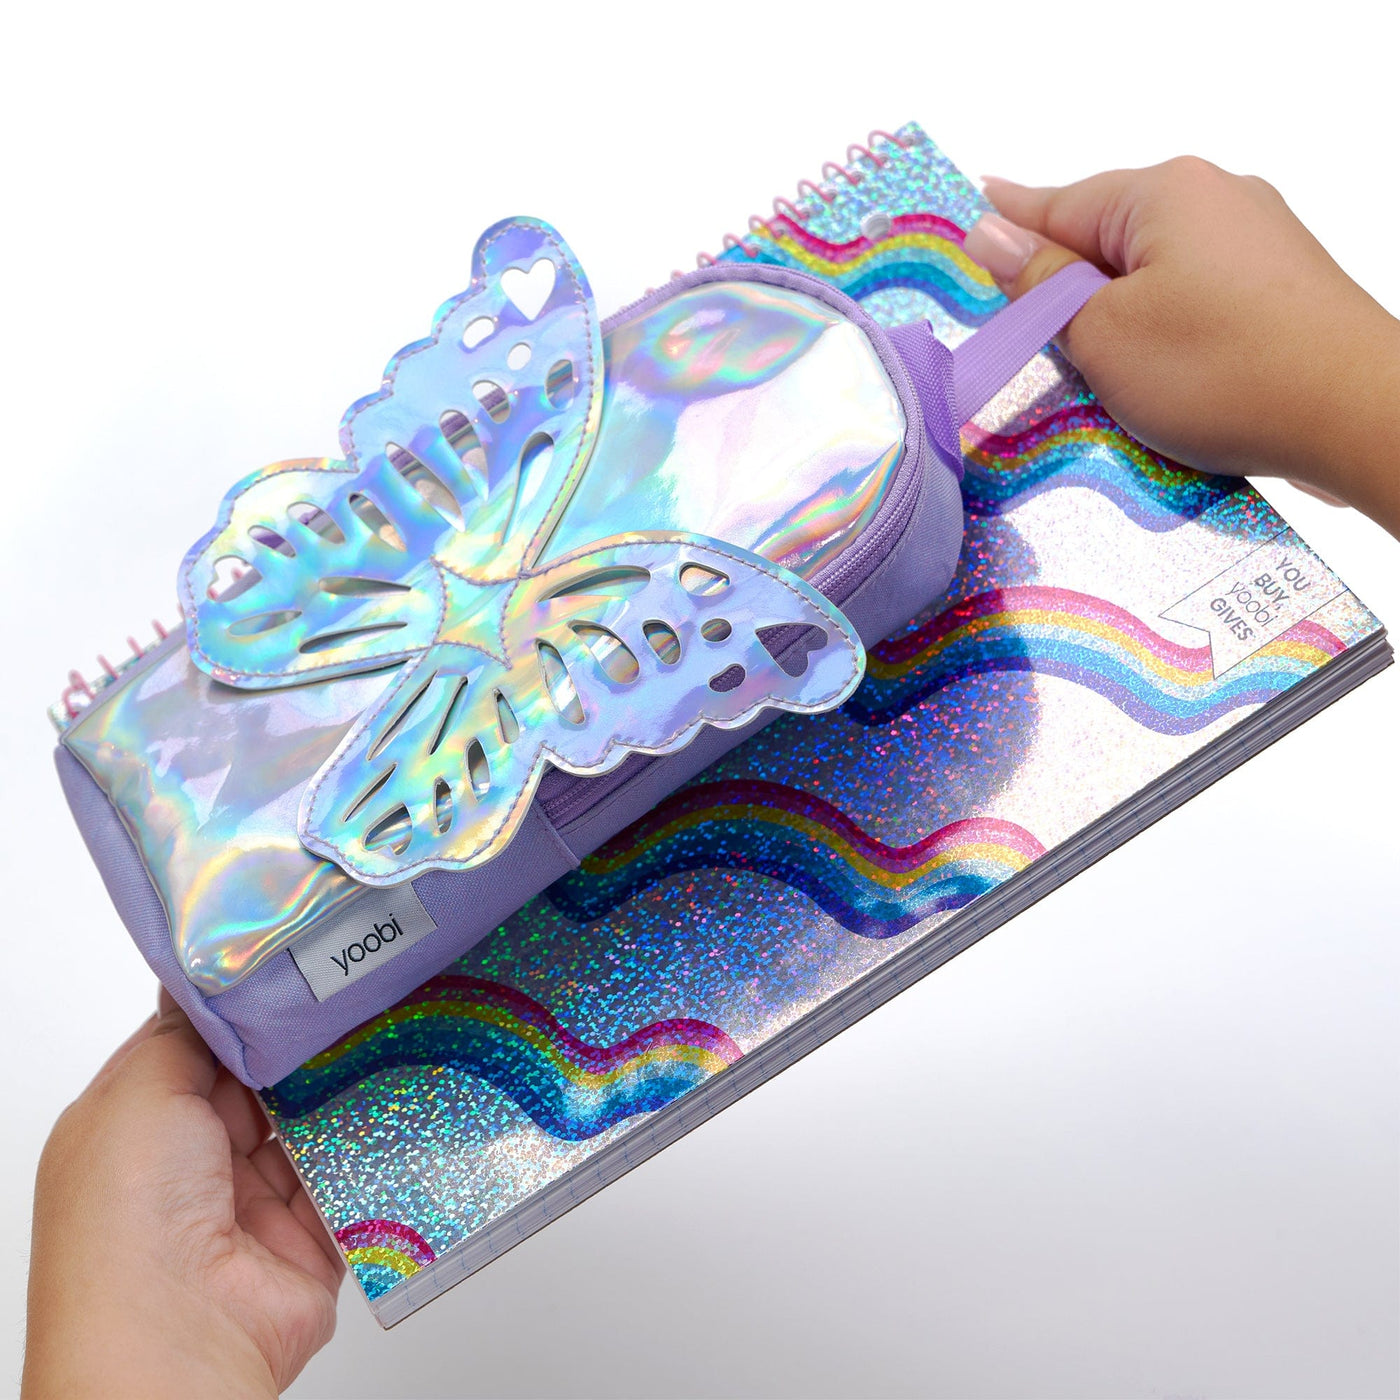 Holographic butterfly backpack pencil case showing case strapped to front of spiral one subject notebook using  its adjustable straps